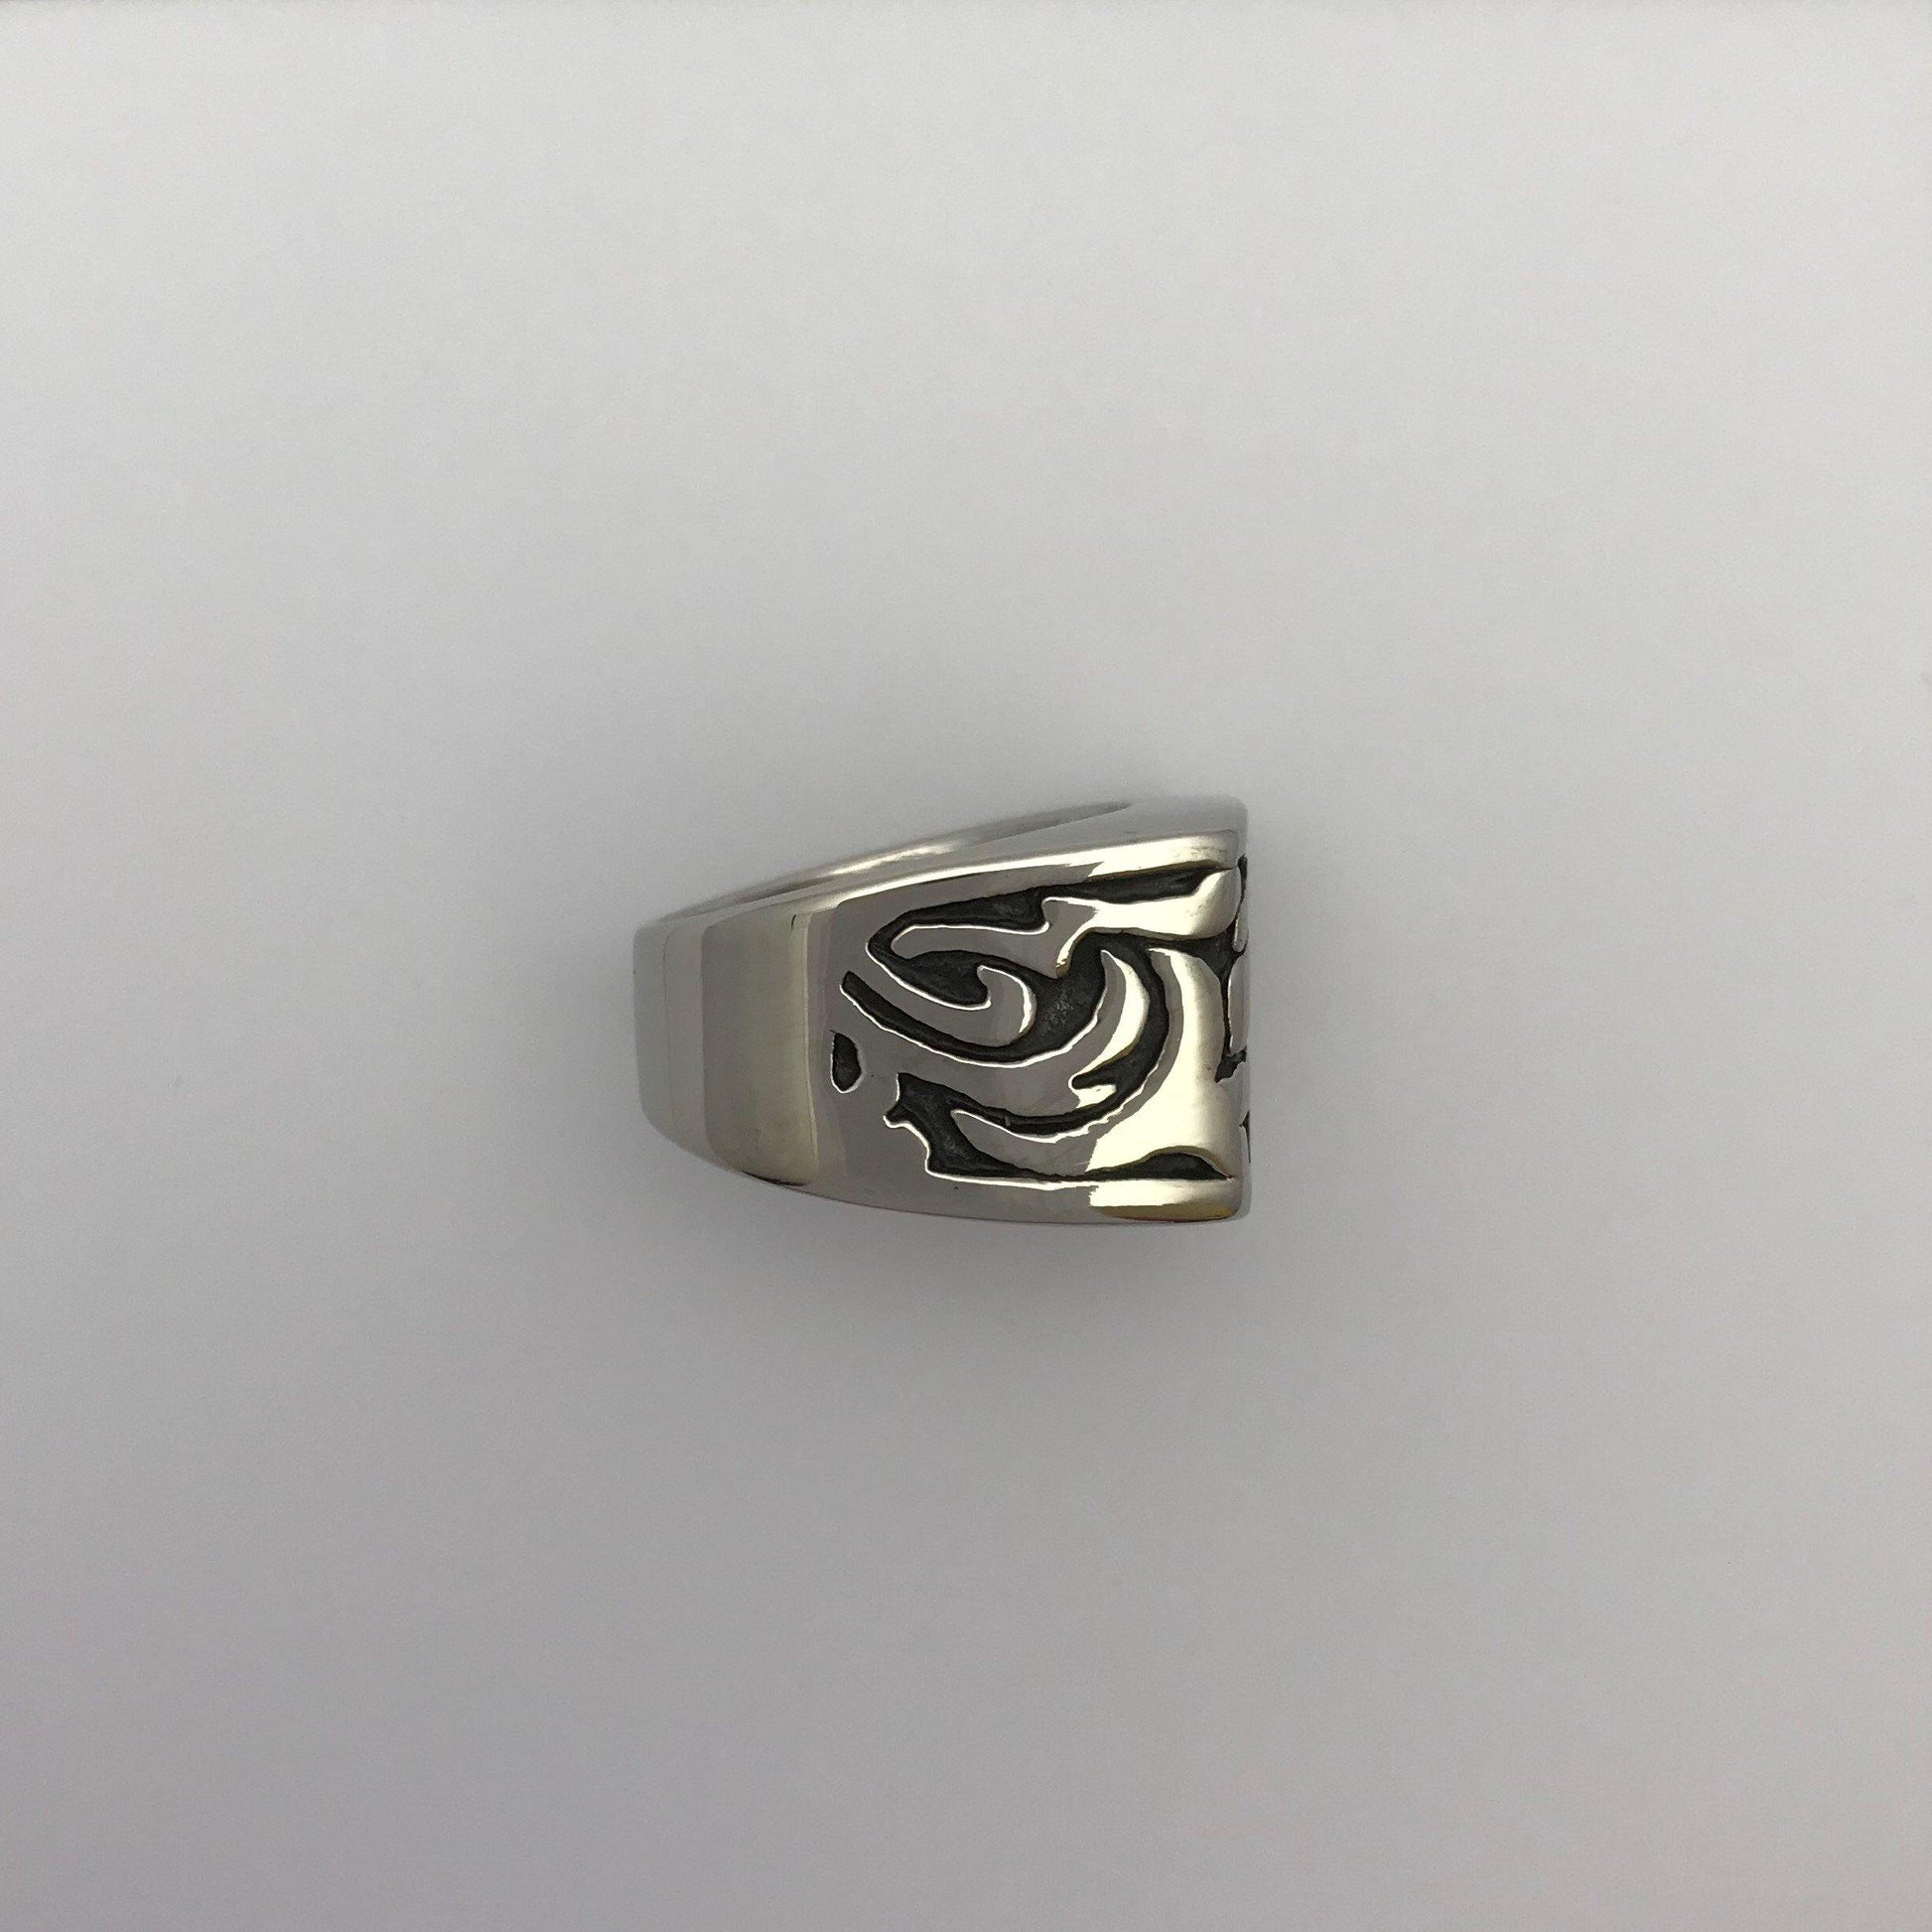 Filigree Ring - Big Dog Steel Surgical Stainless Steel